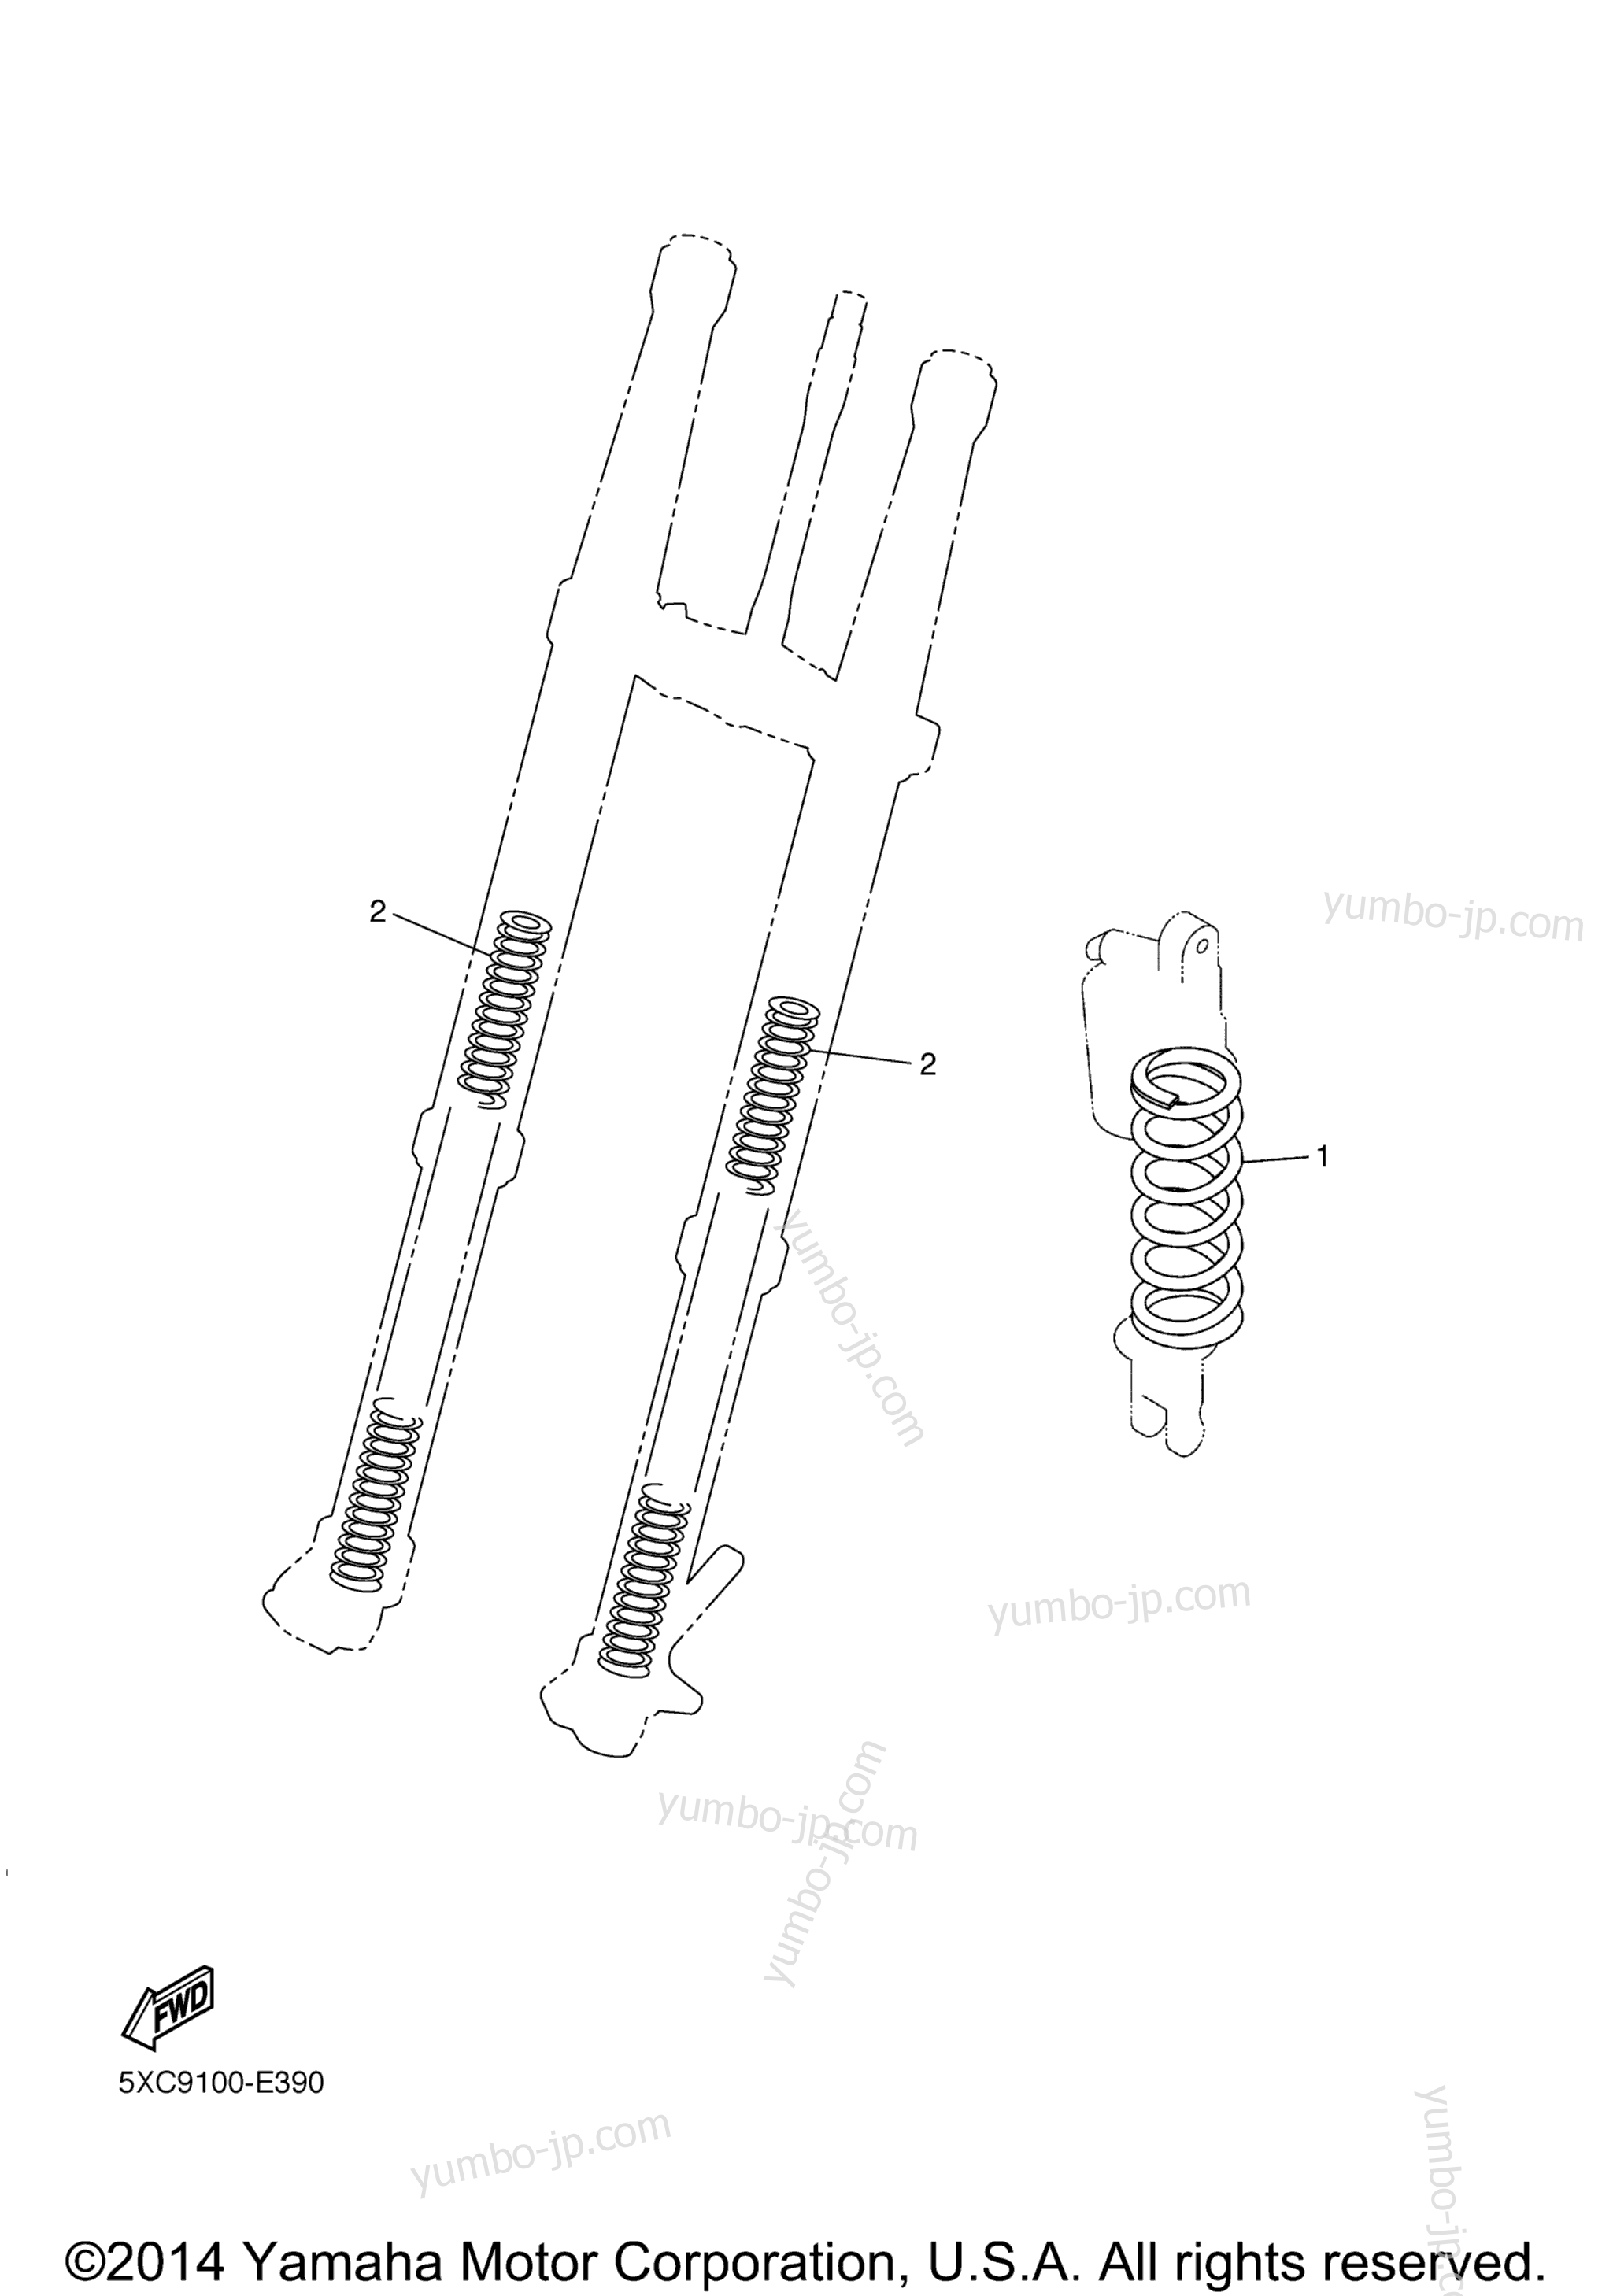 Alternate For Chassis for motorcycles YAMAHA YZ450F (YZ450FV) 2006 year